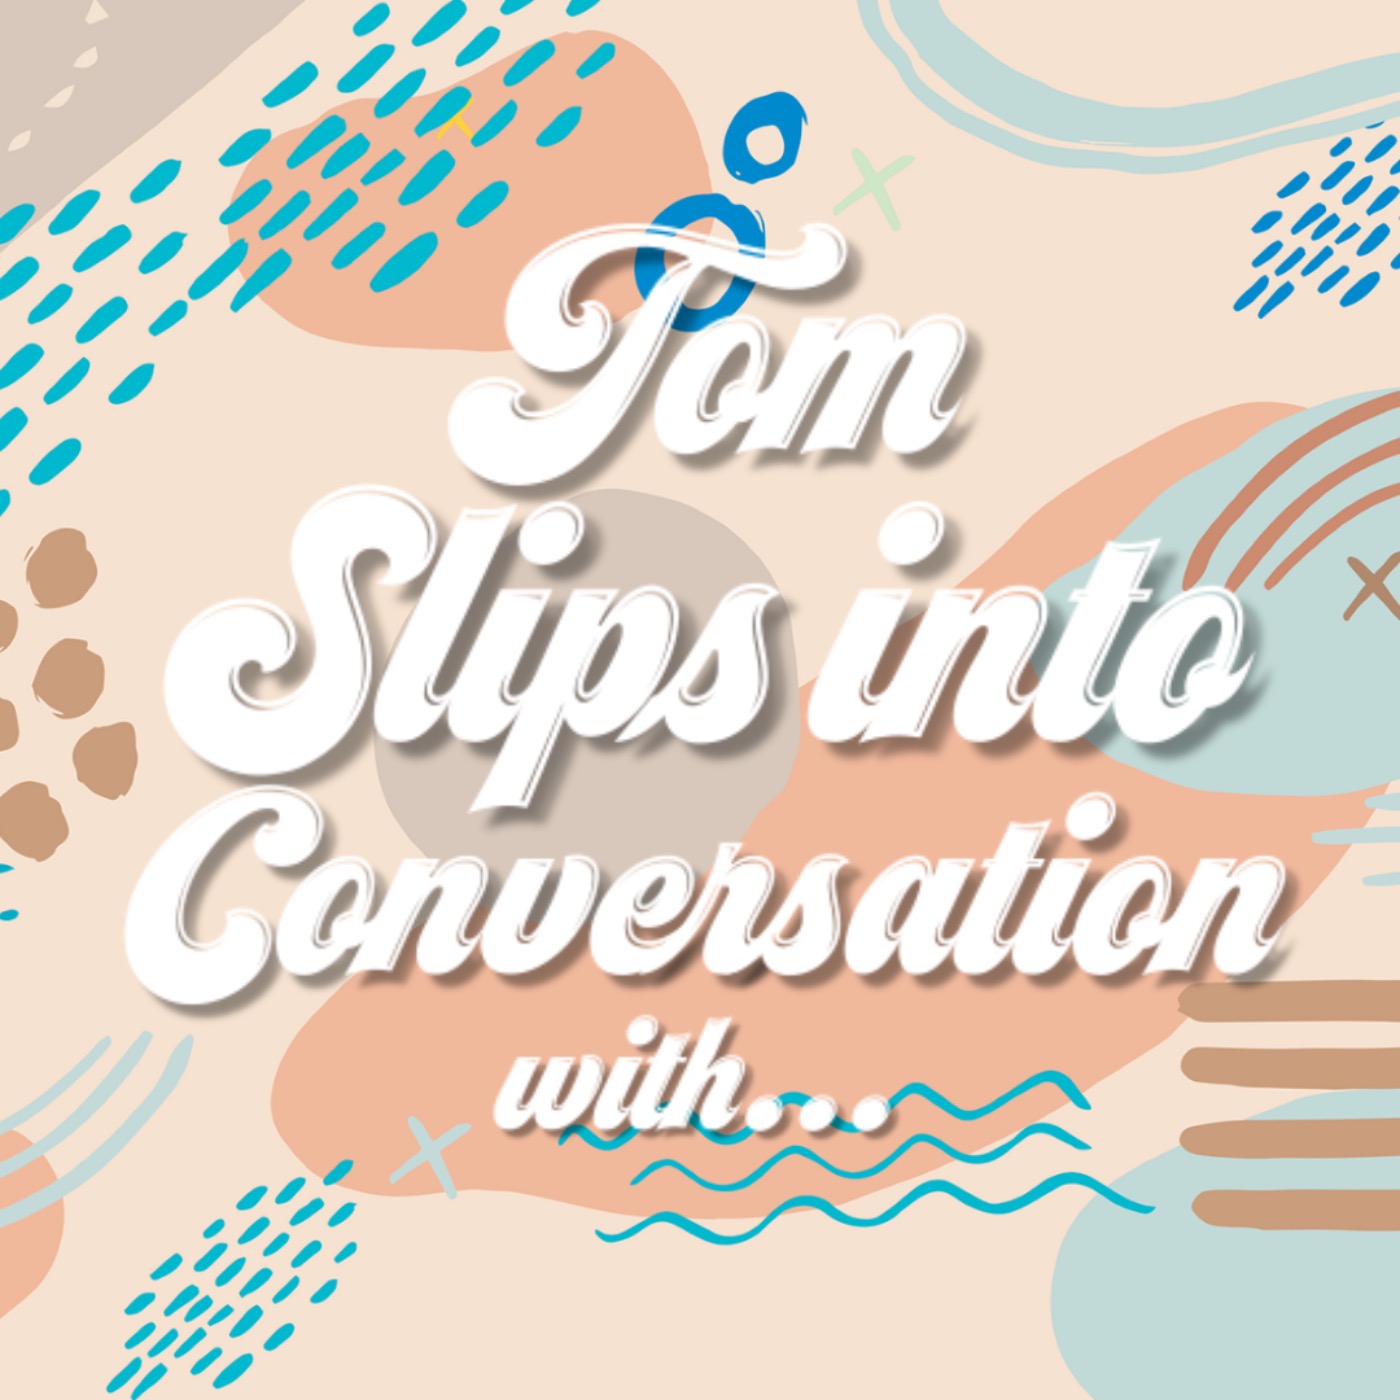 Tom slips into conversation with